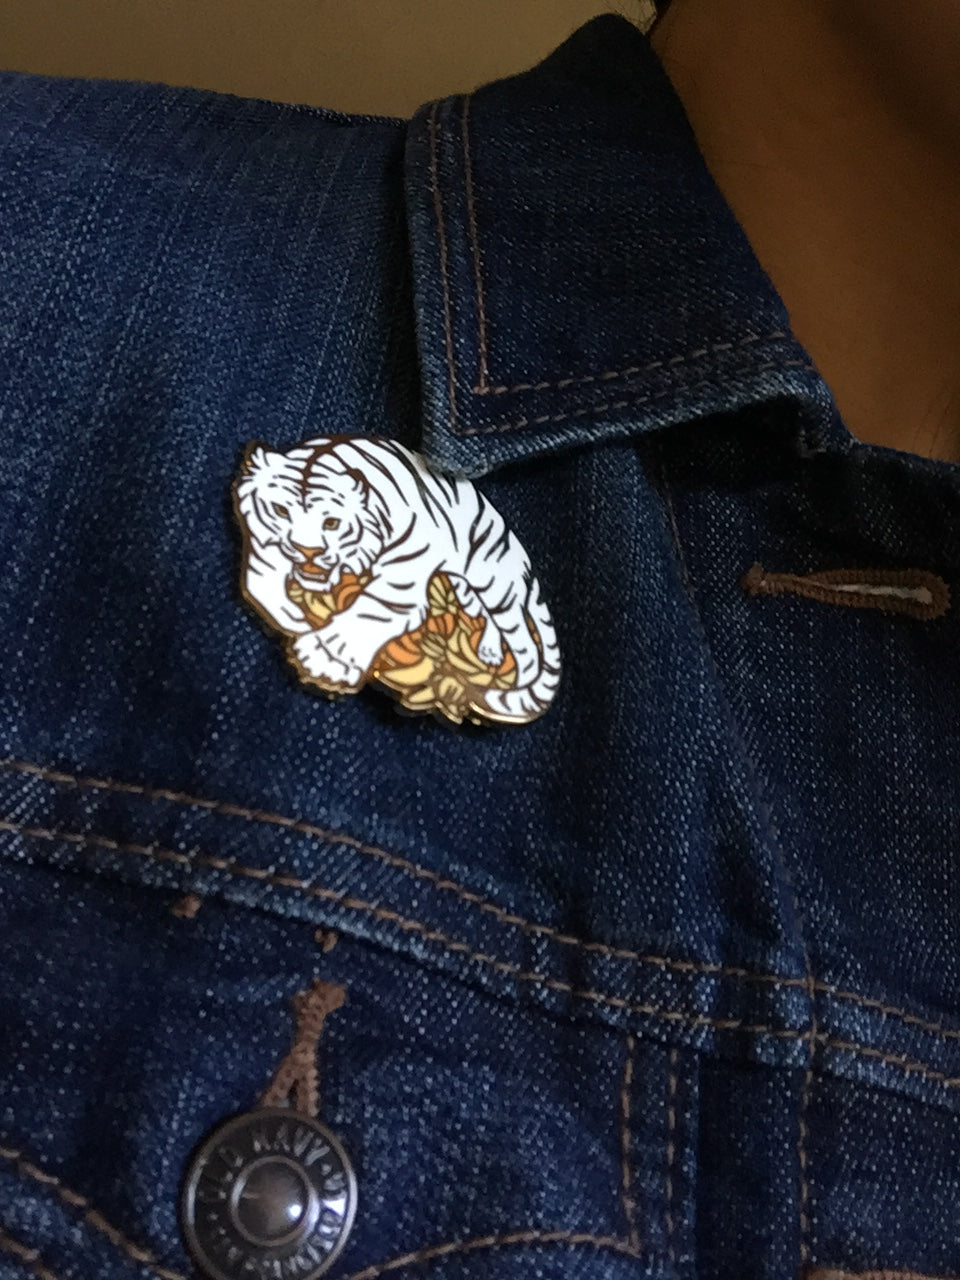 Denim jacket with White Tiger pin attached.